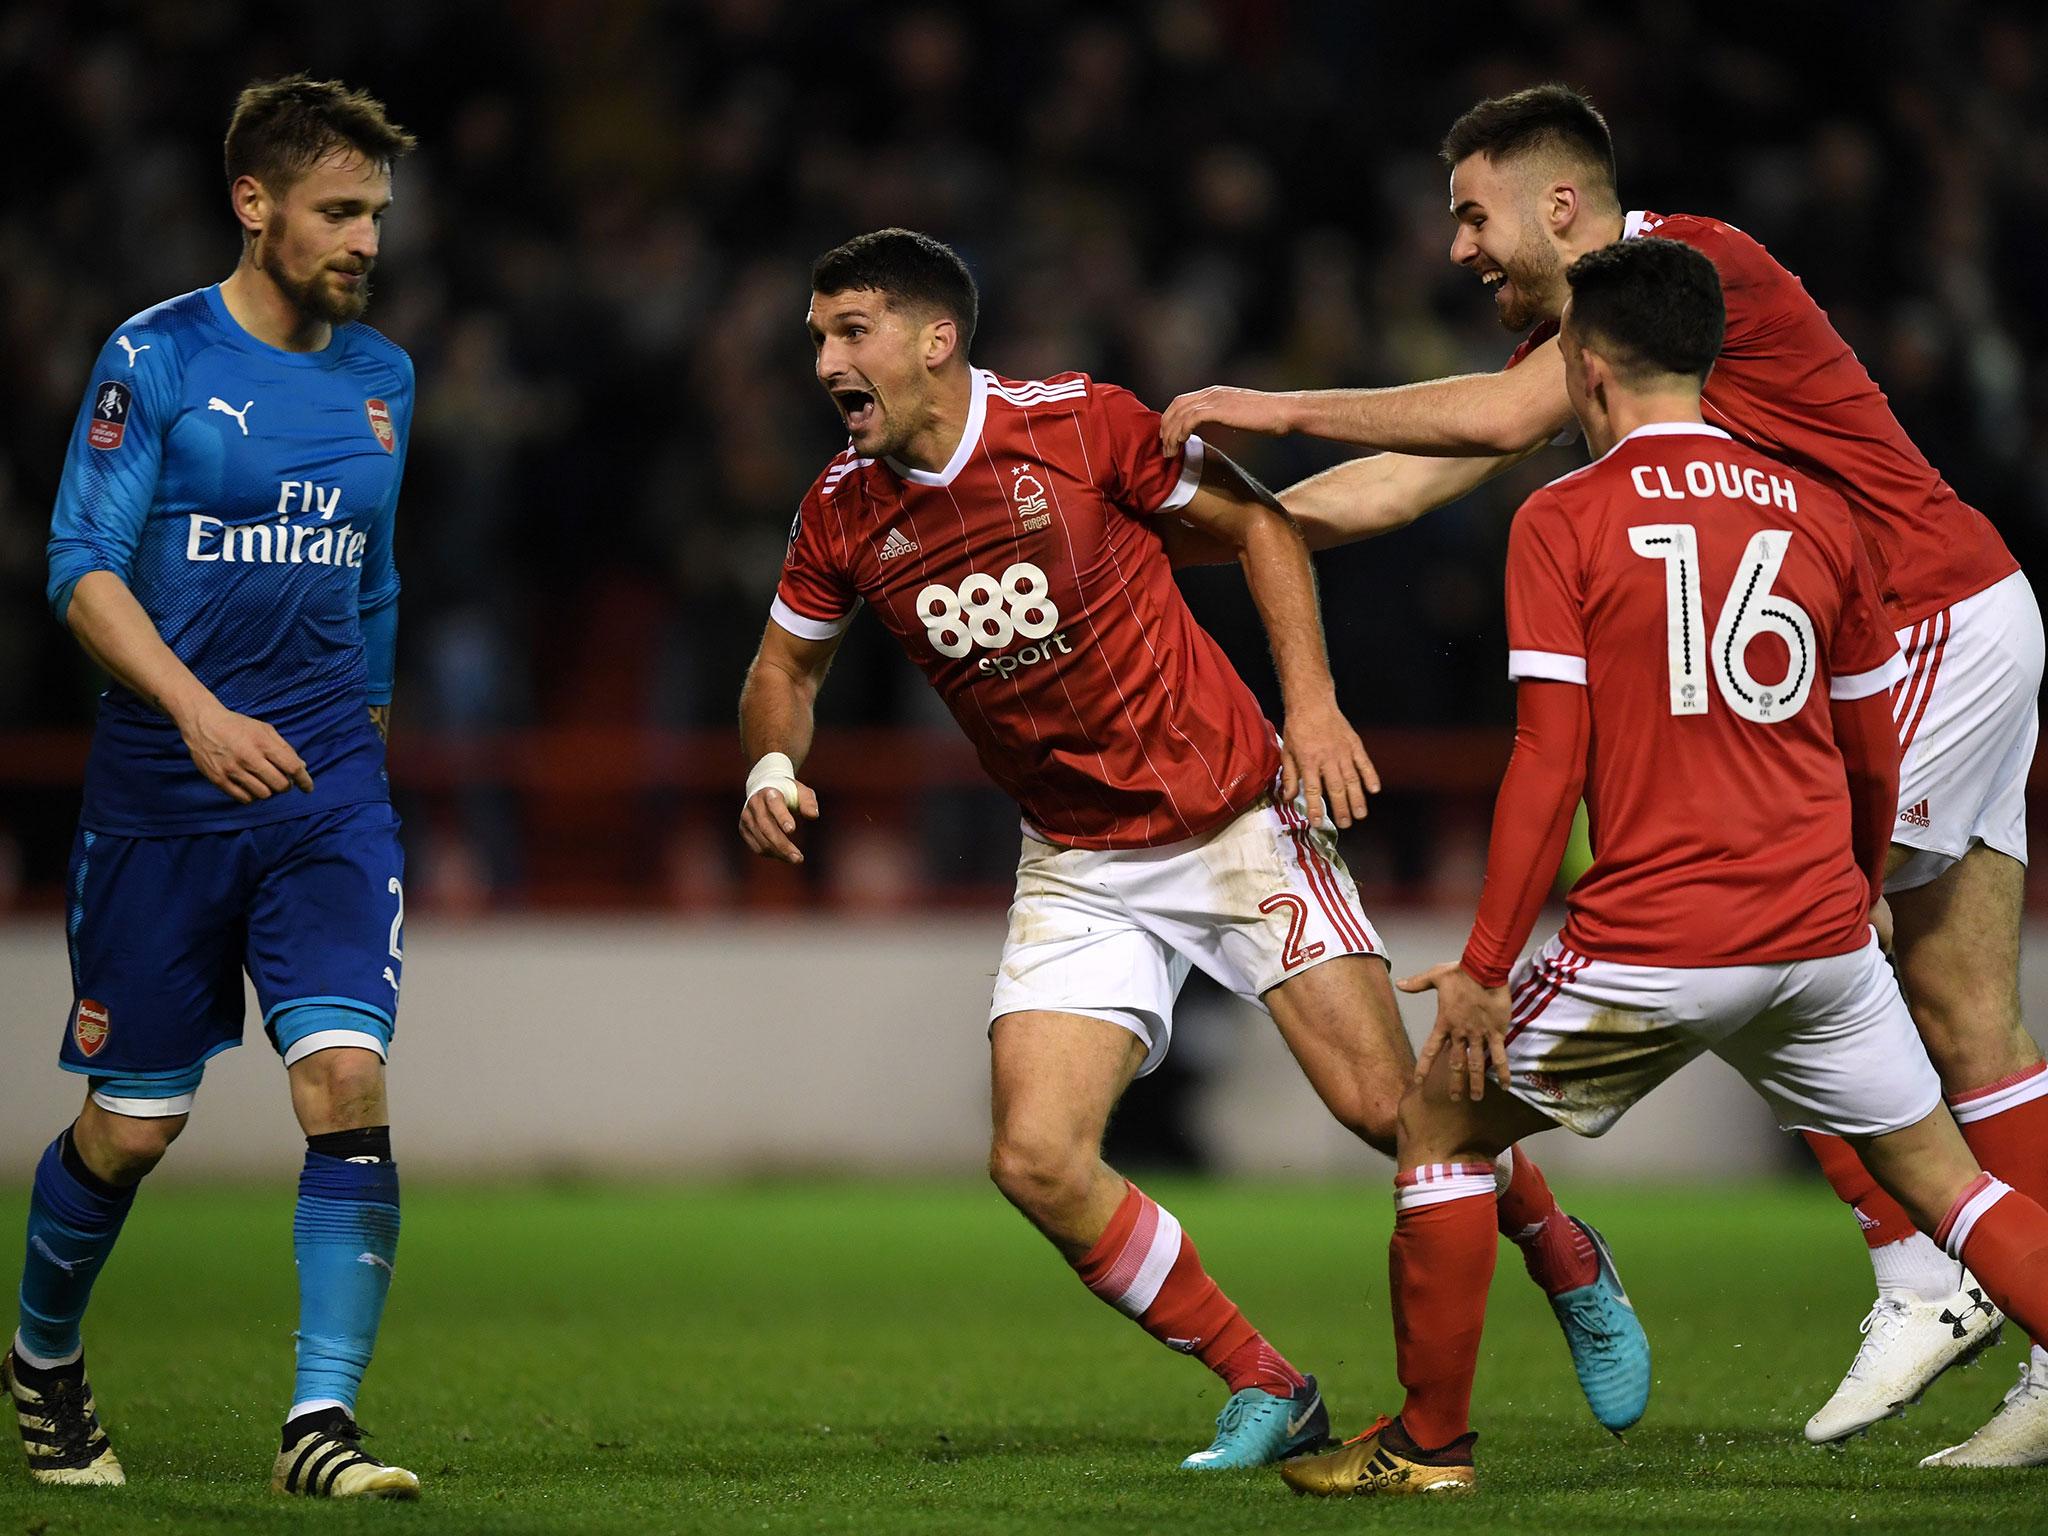 Eric Lichaj clinched a brace in a historic and memorable win for Nottingham Forest